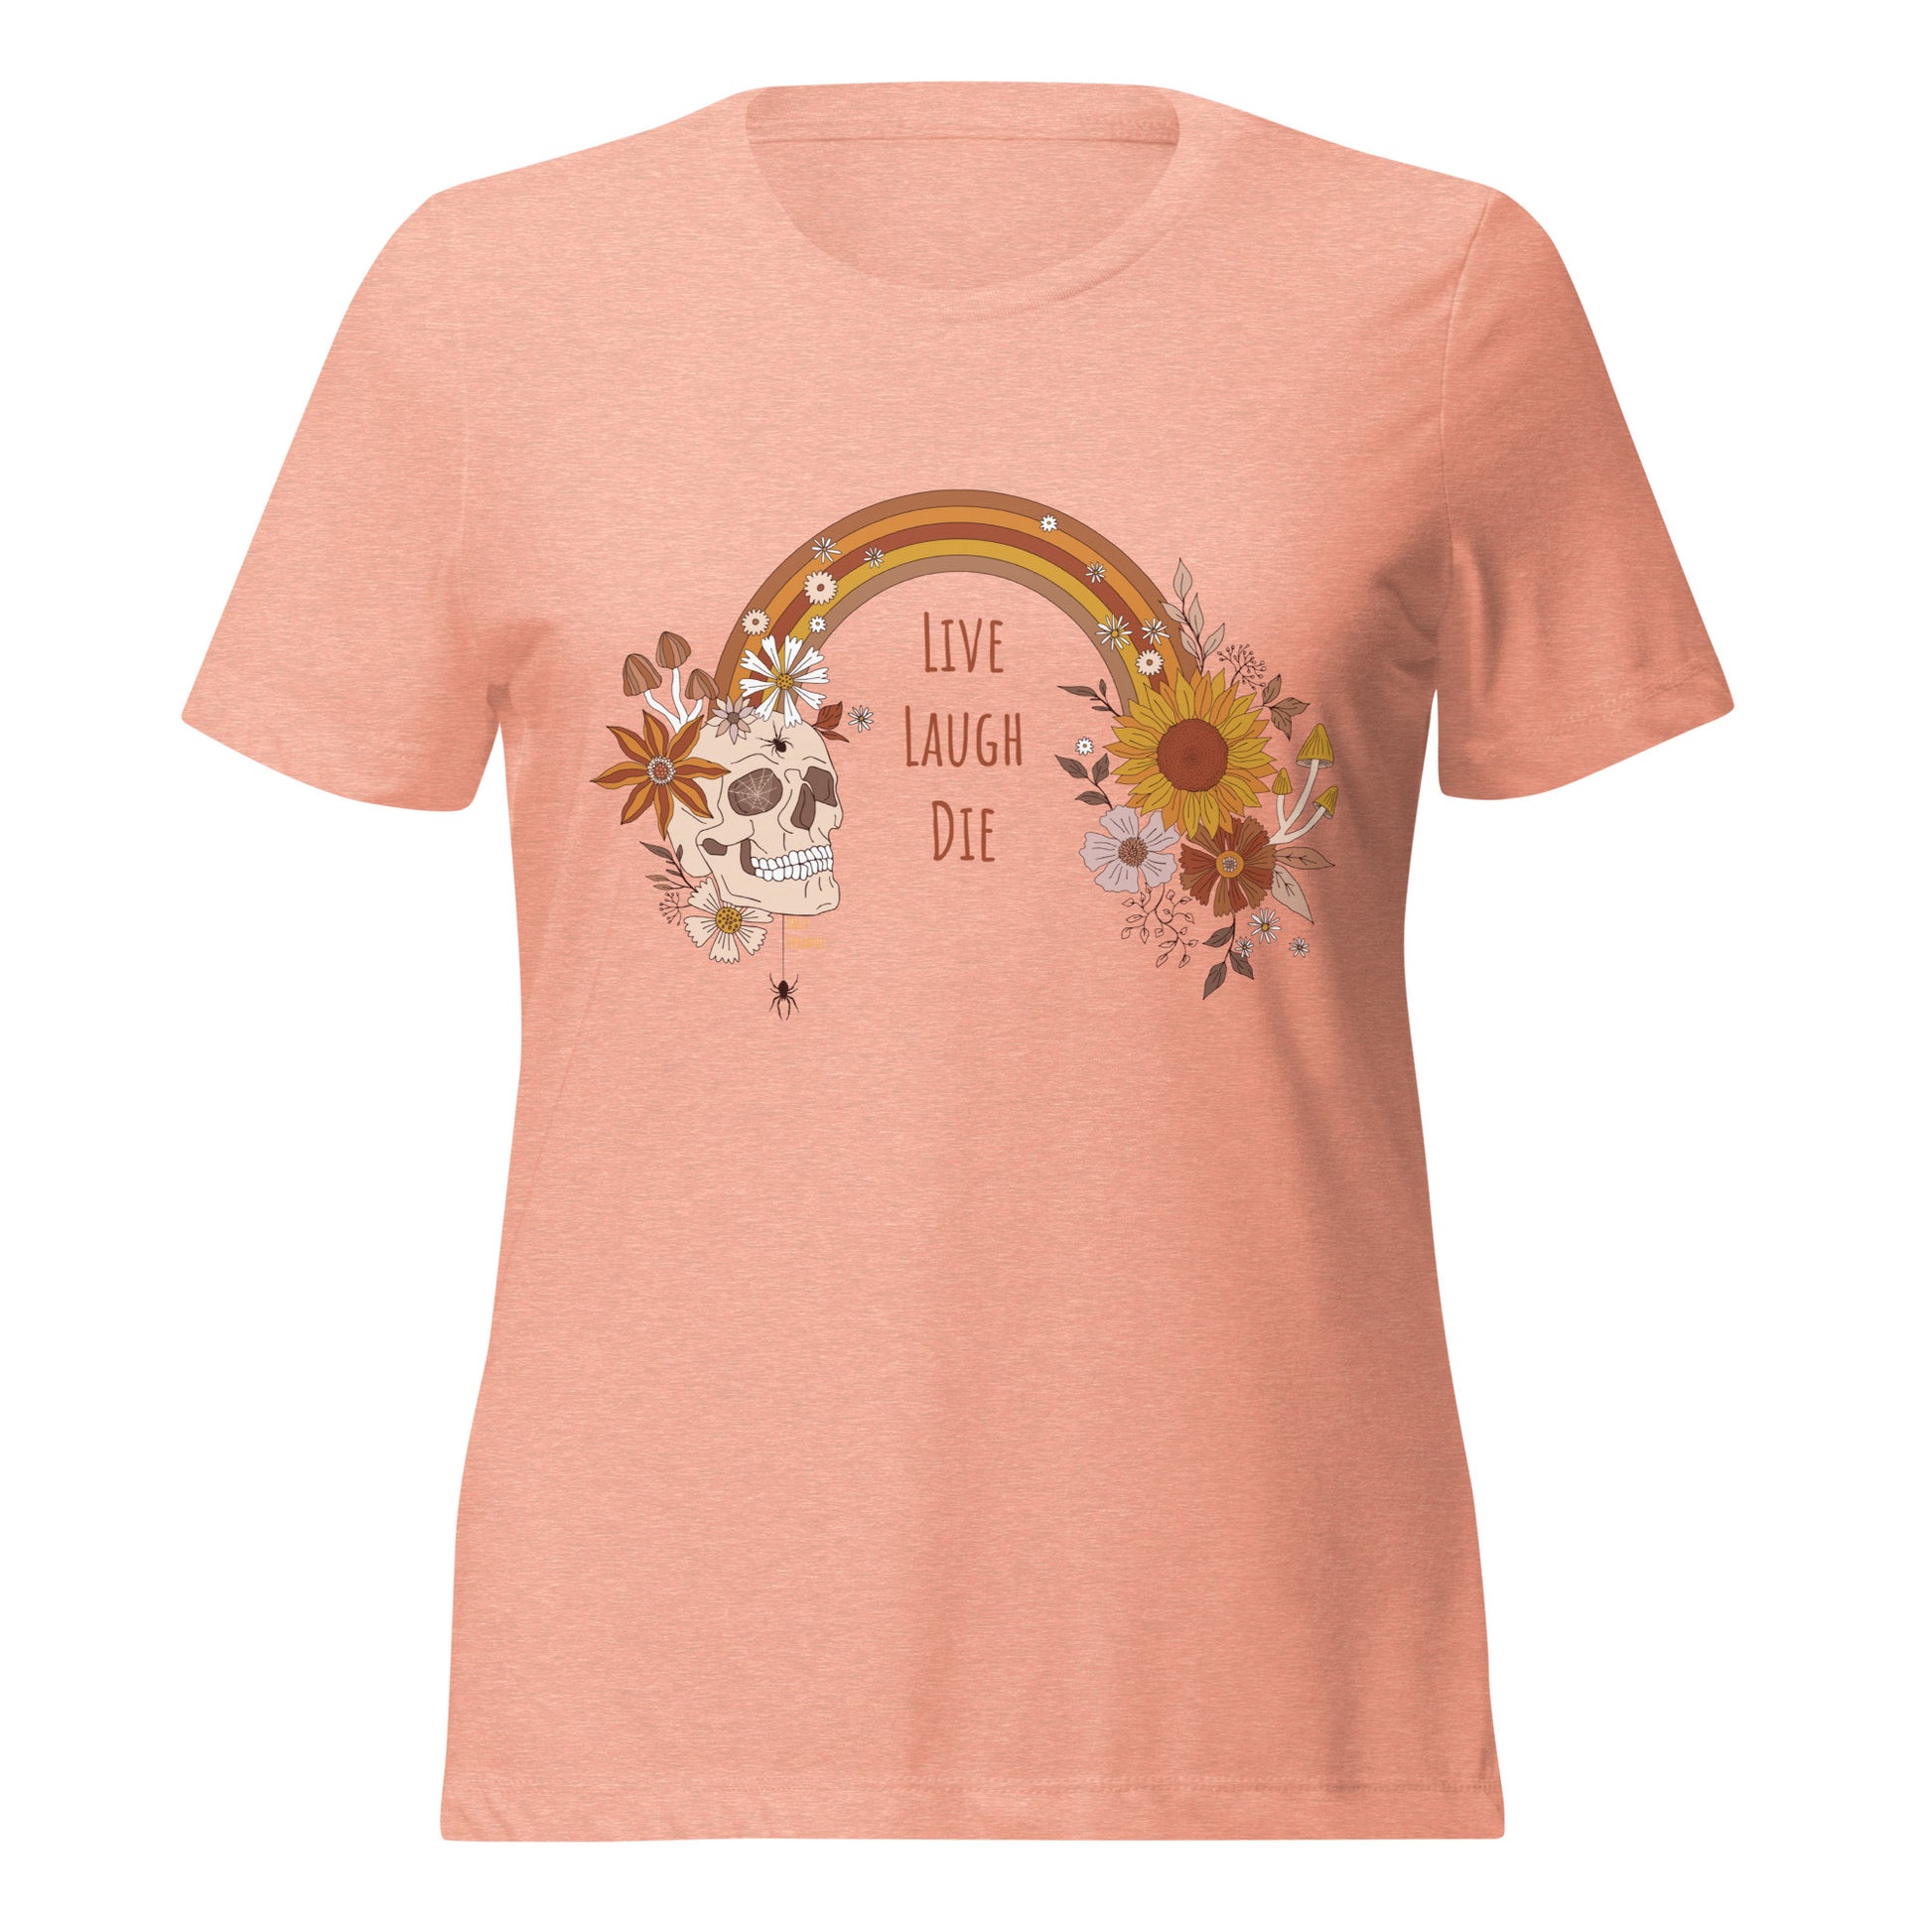 "Live, Laugh, Die" relaxed tri-blend t-shirt, sunset colored tee